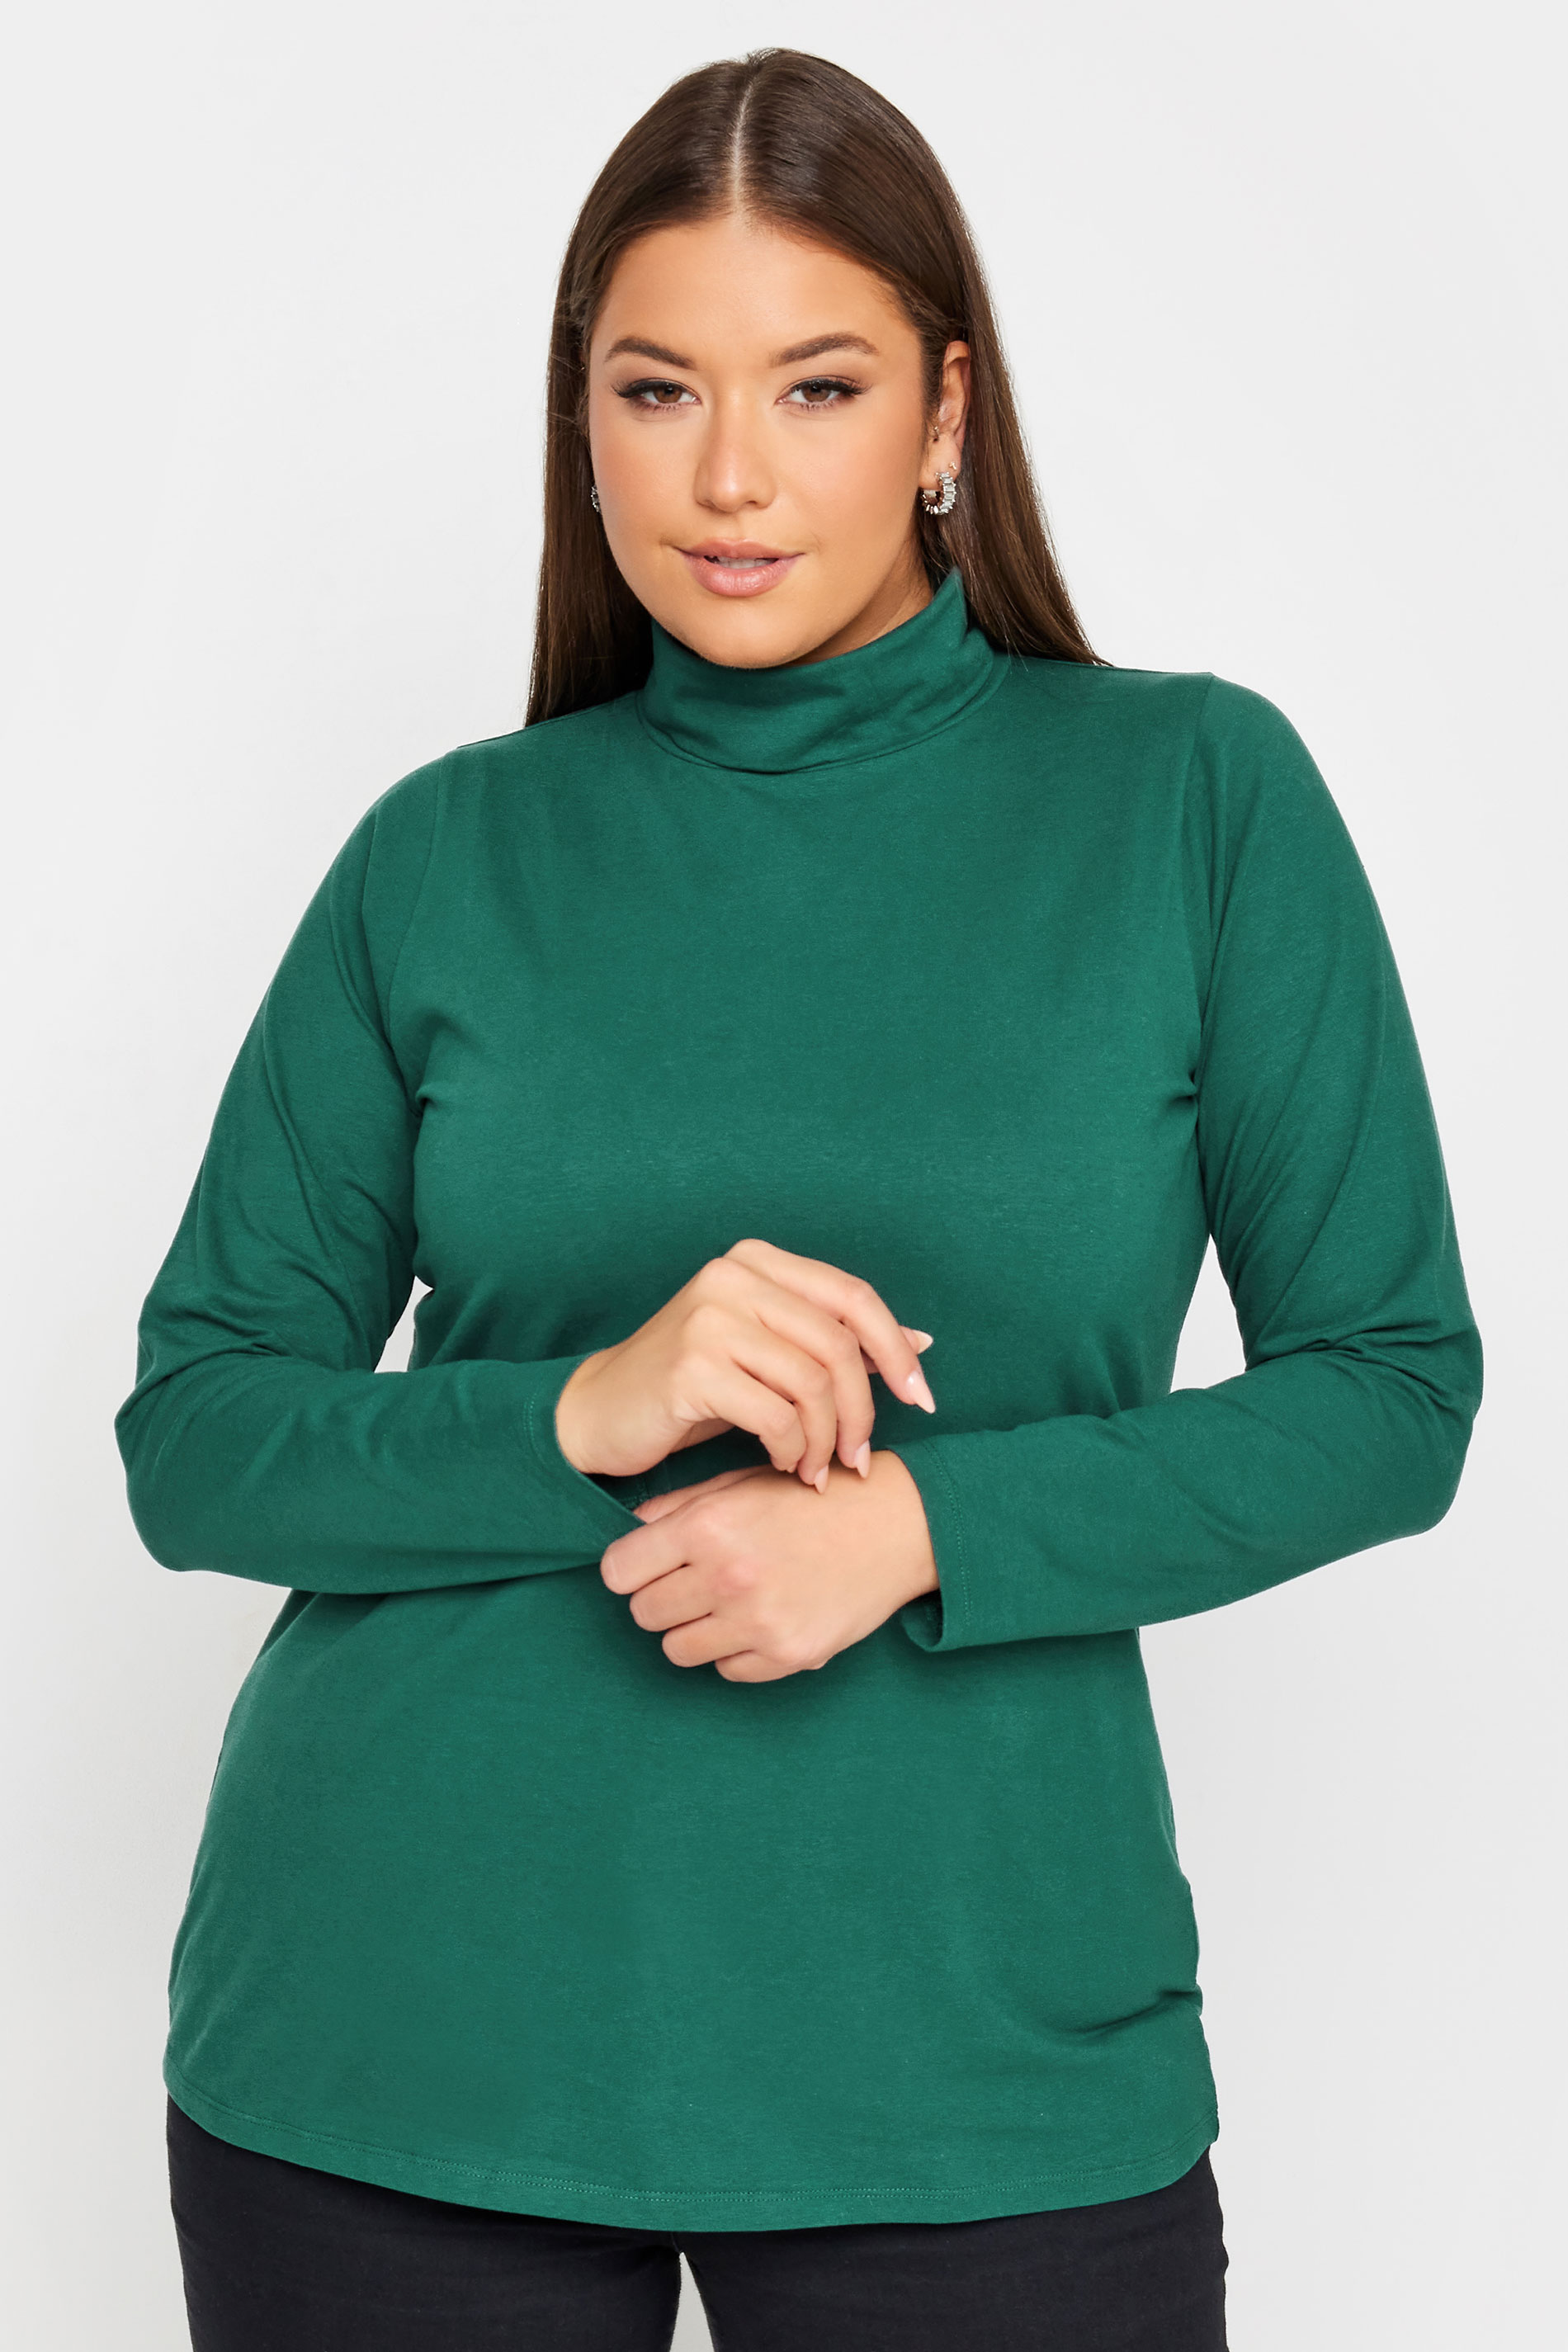 YOURS Plus Size 2 PACK Black & Forest Green Long Sleeve Turtle Neck Tops | Yours Clothing 2